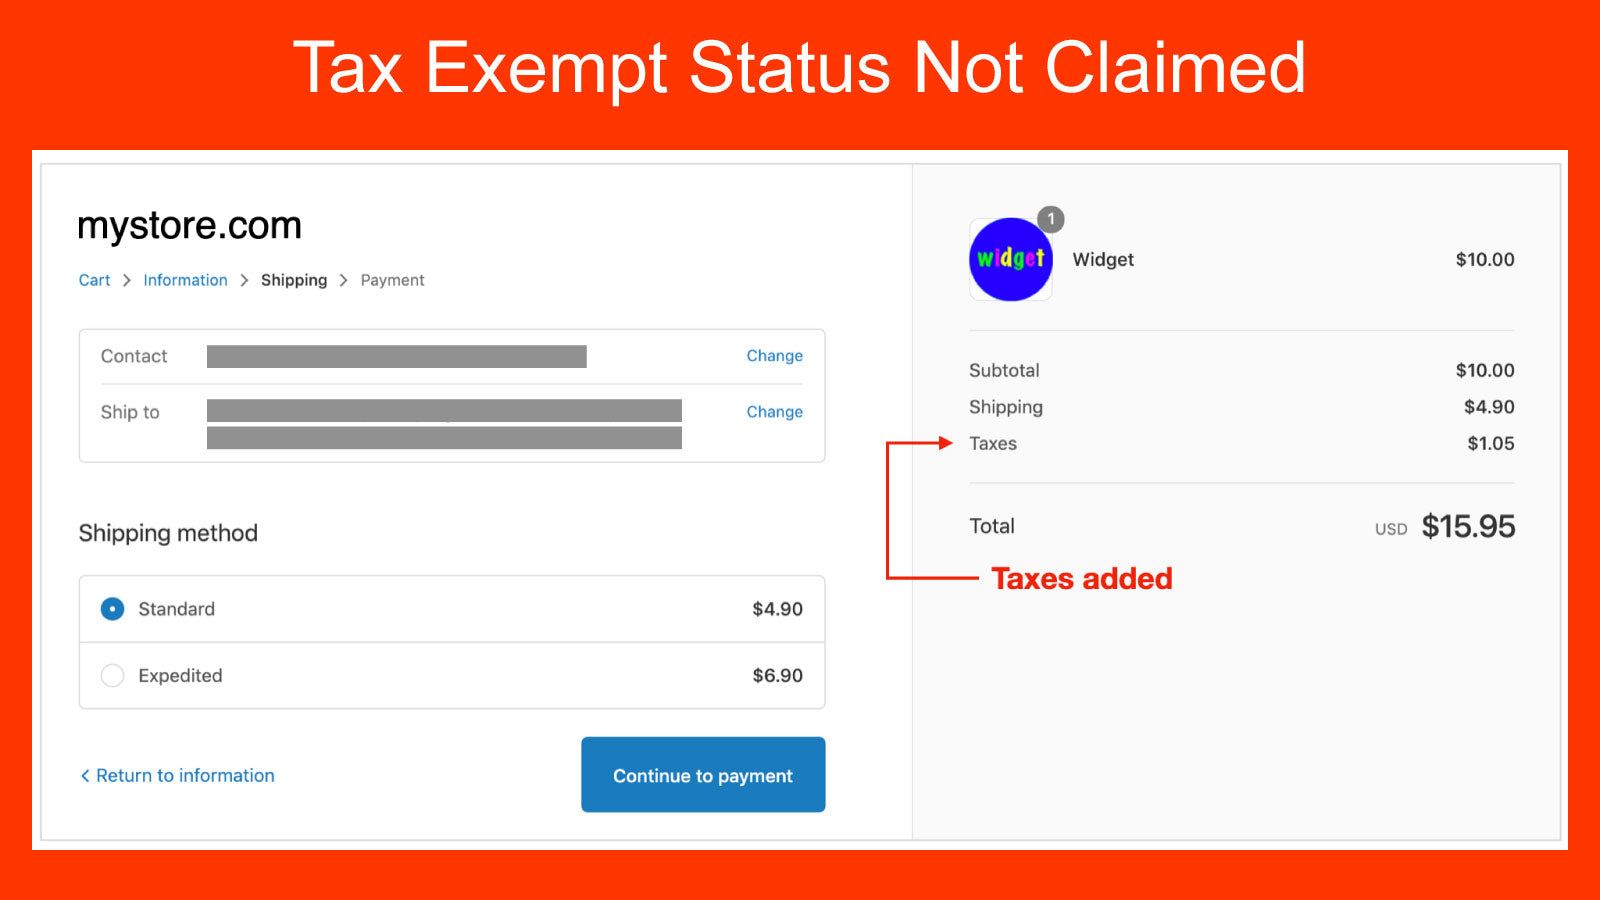 Shipment Methods page with out tax exempt status claimed